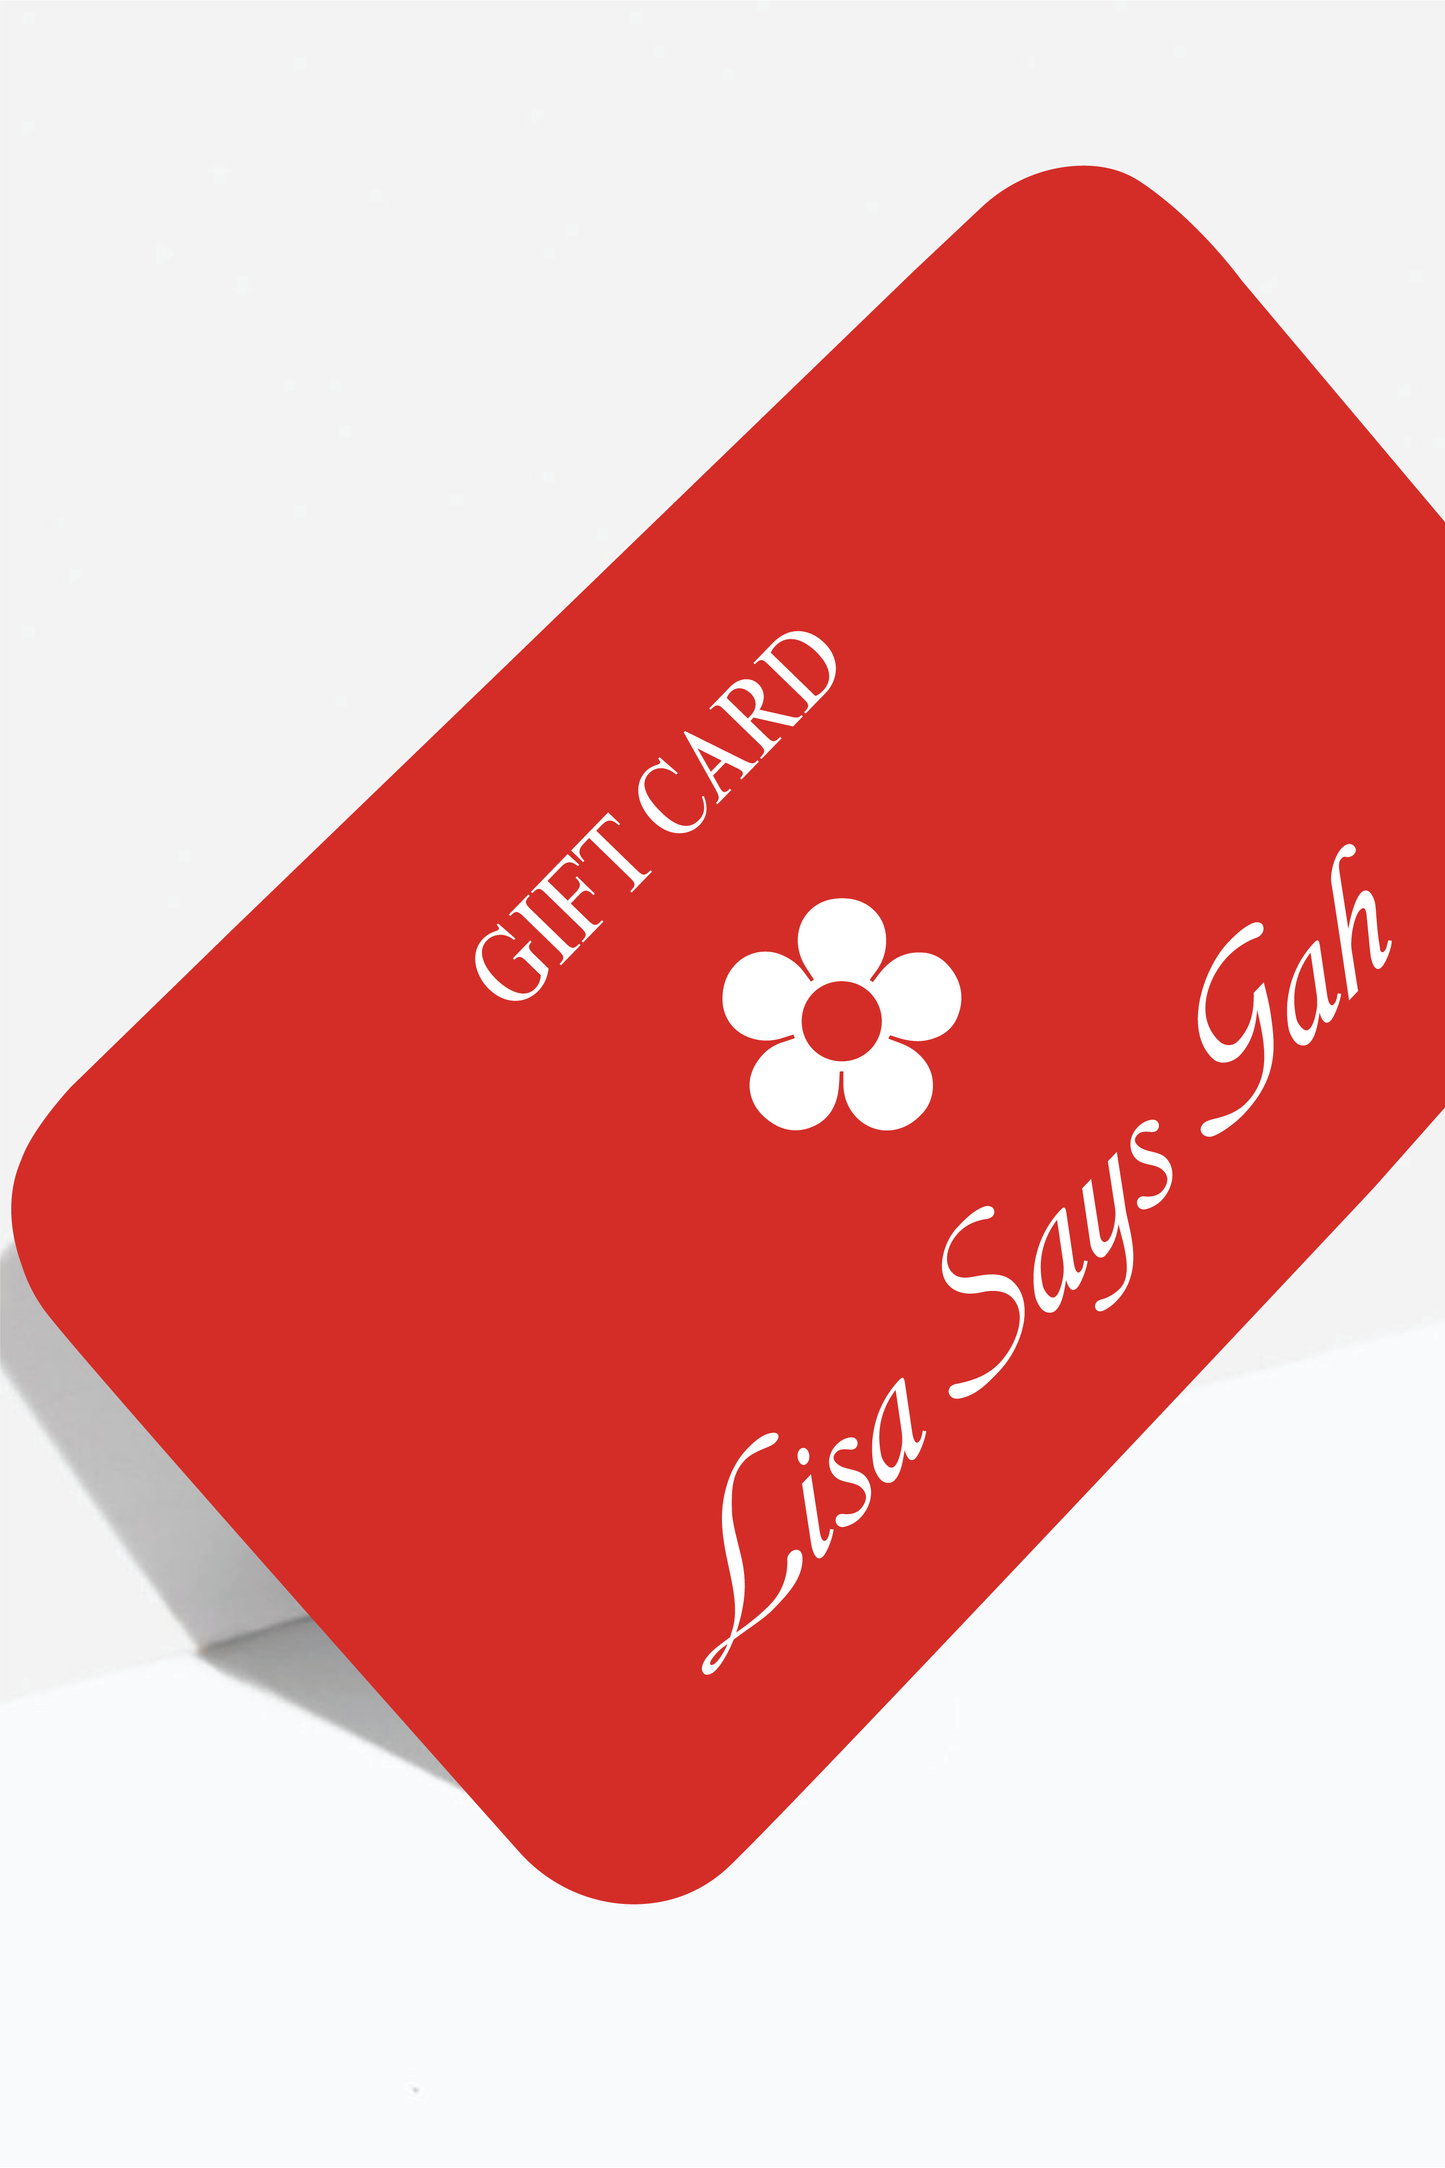 Buy Gift Cards & Game Cards in Pakistan - Digital Store‎